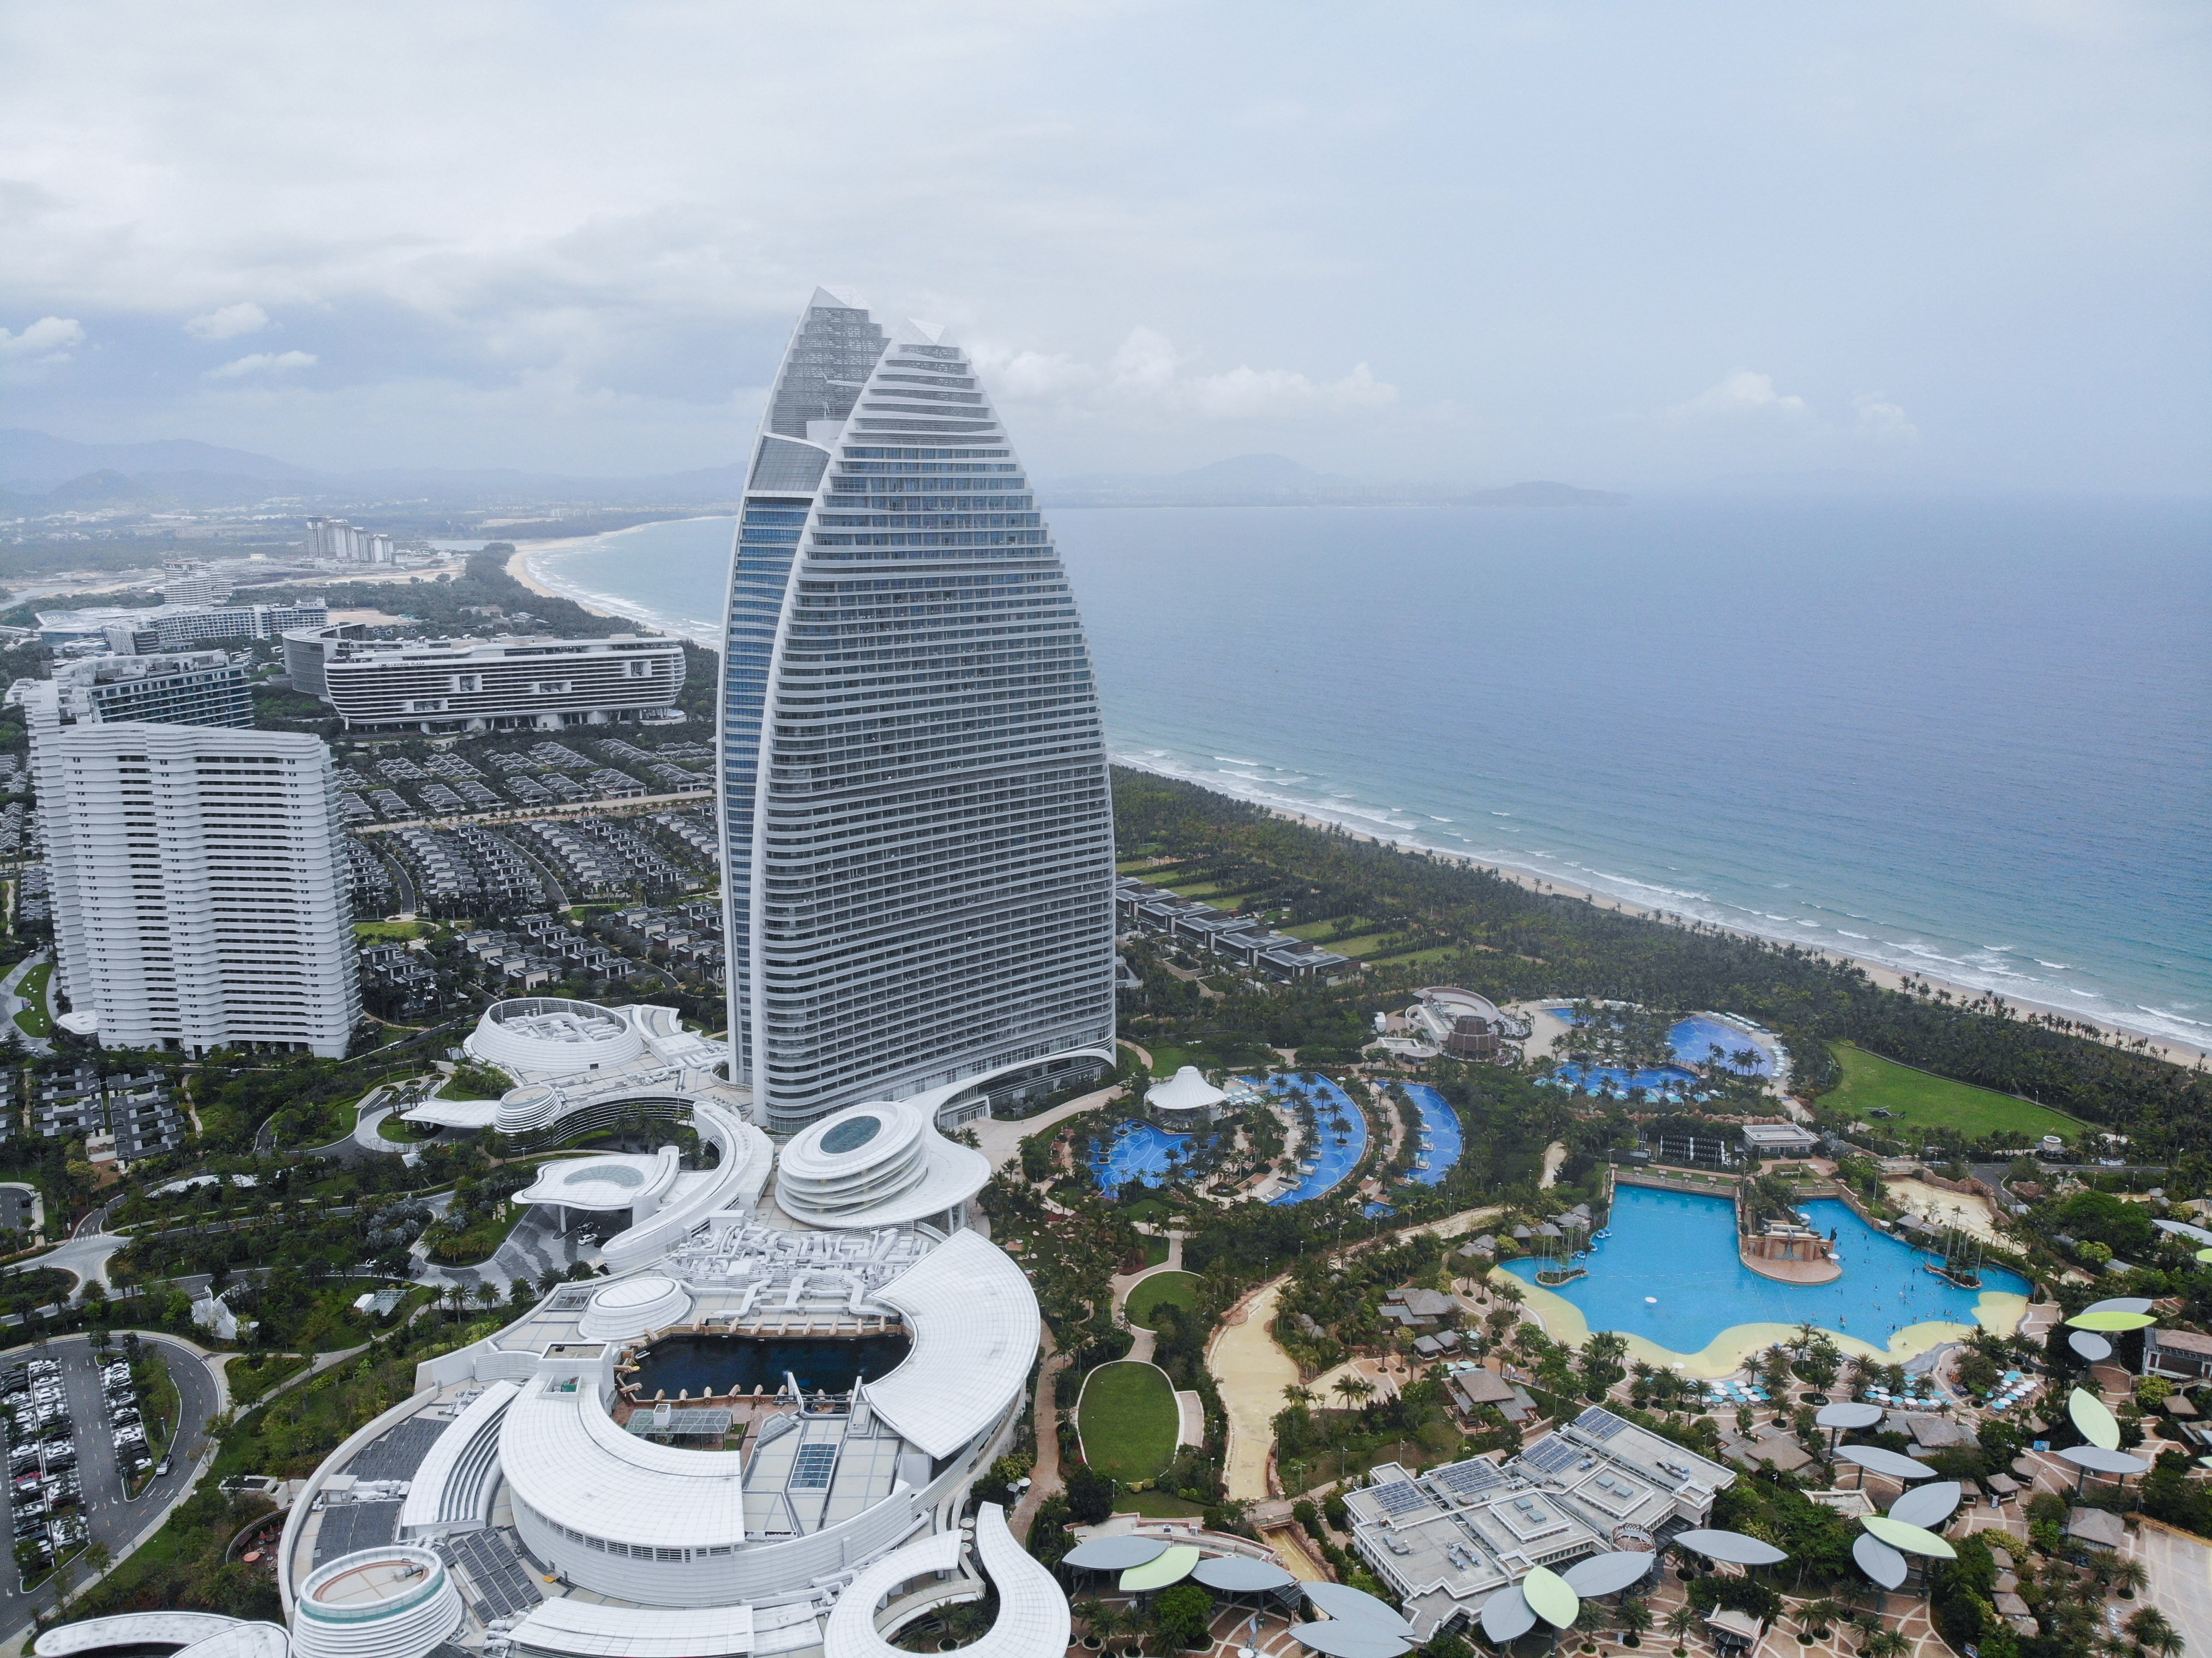 The Atlantis Sanya. Fosun International has been in talks with potential buyers over the sale of a part or all of its stake in the resort. Photo: Xinhua